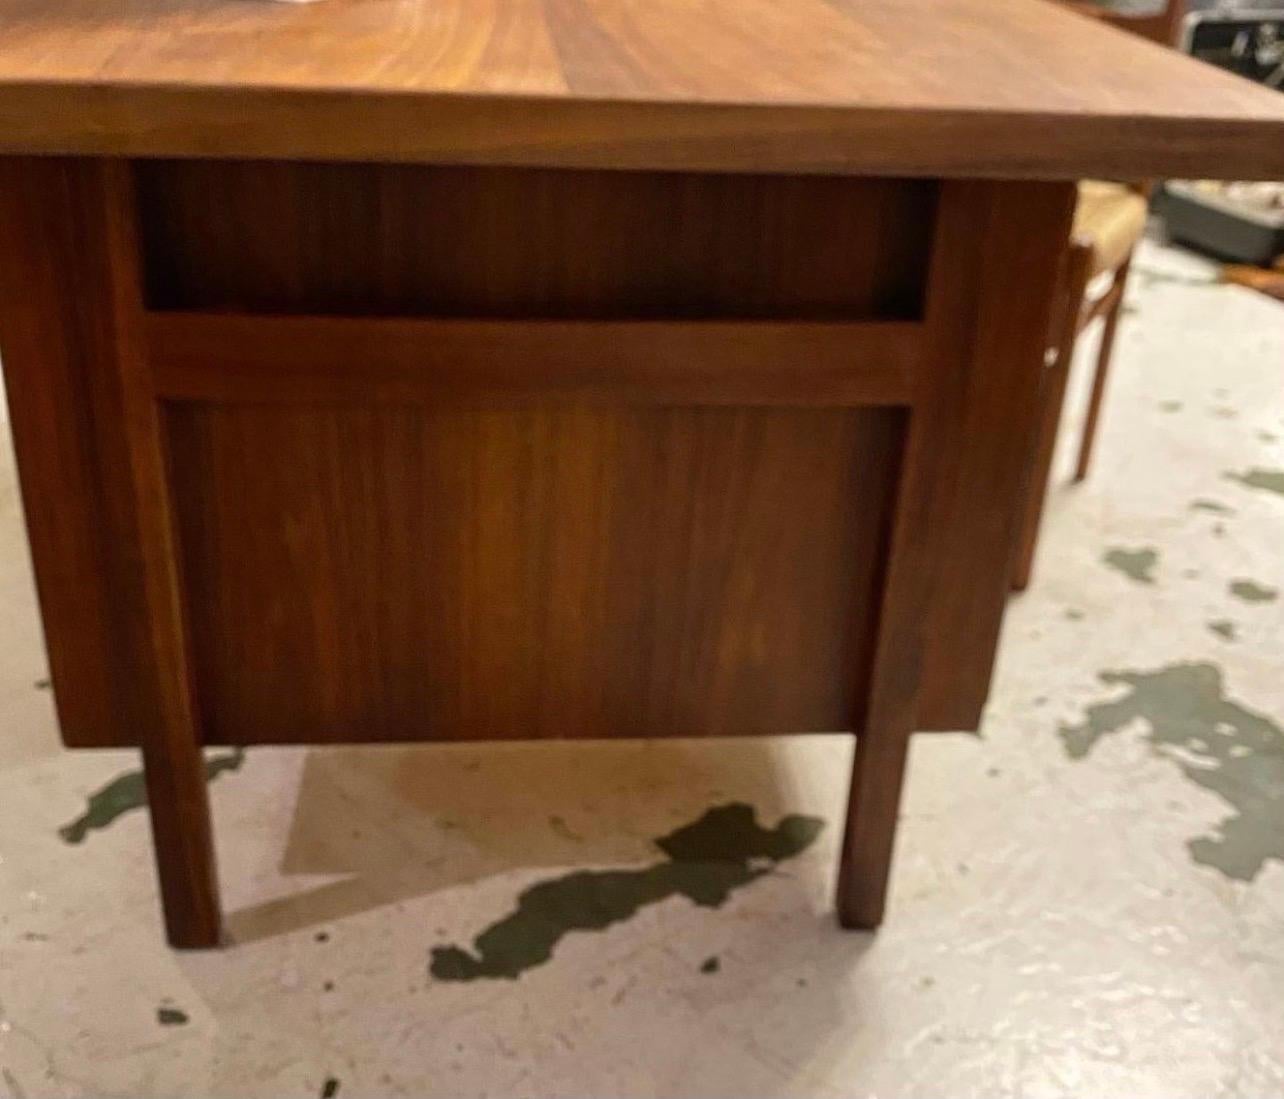 Fantastic Vintage MCM Executive Walnut Asymmetric Desk By Jens Risom In Good Condition For Sale In Seattle, WA